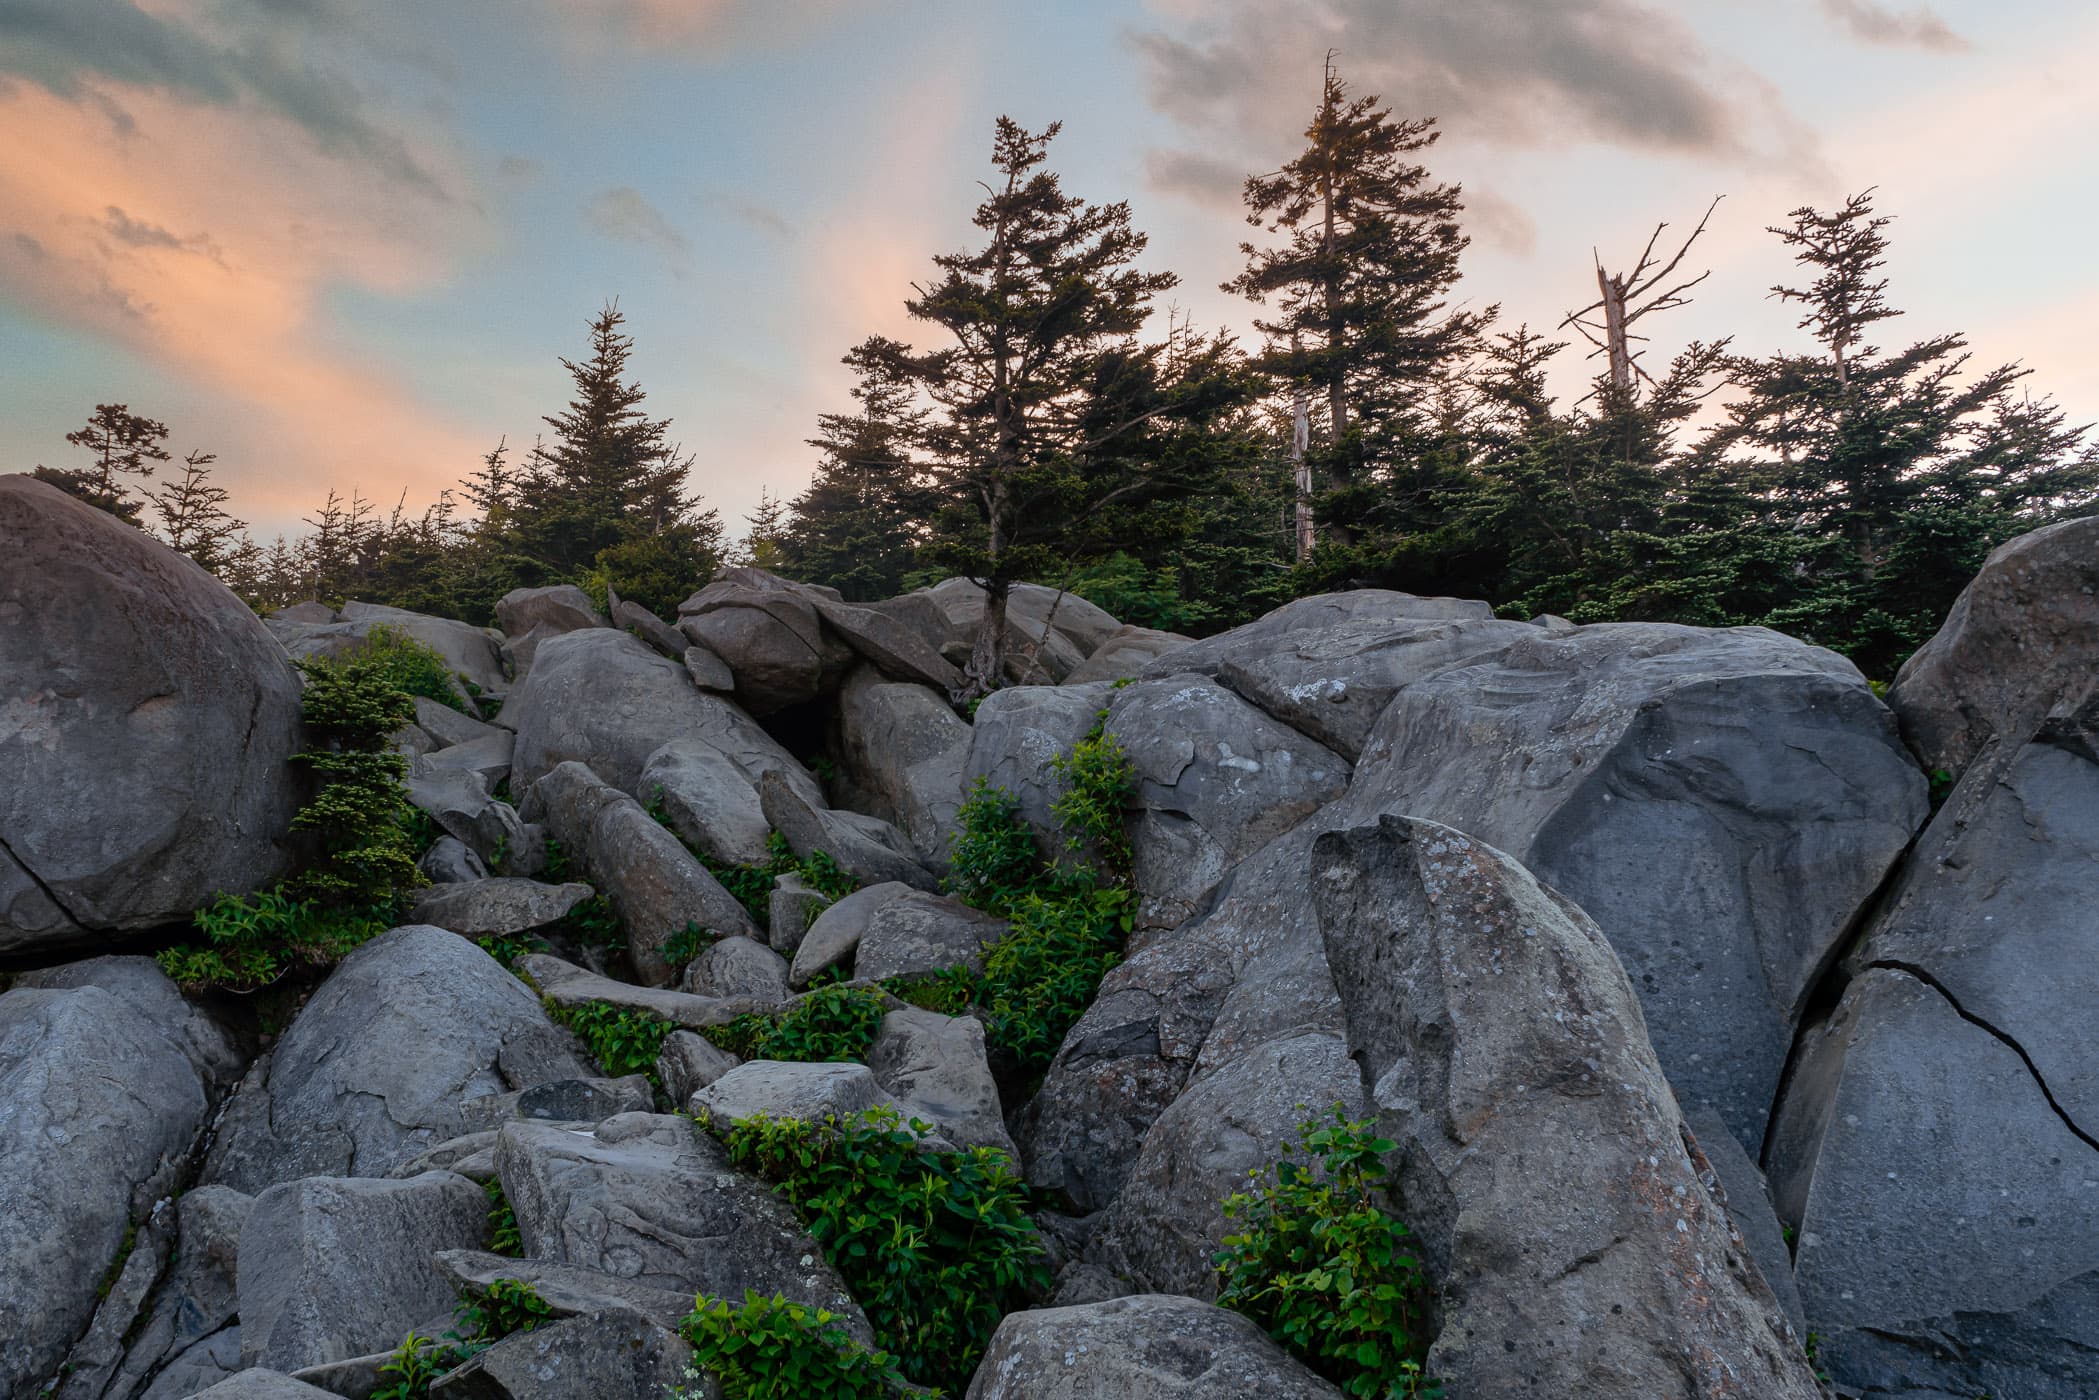 The sun begins to rise on rocks and trees near the summit of the Great Smoky Mountains National Park's Clingmans Dome.